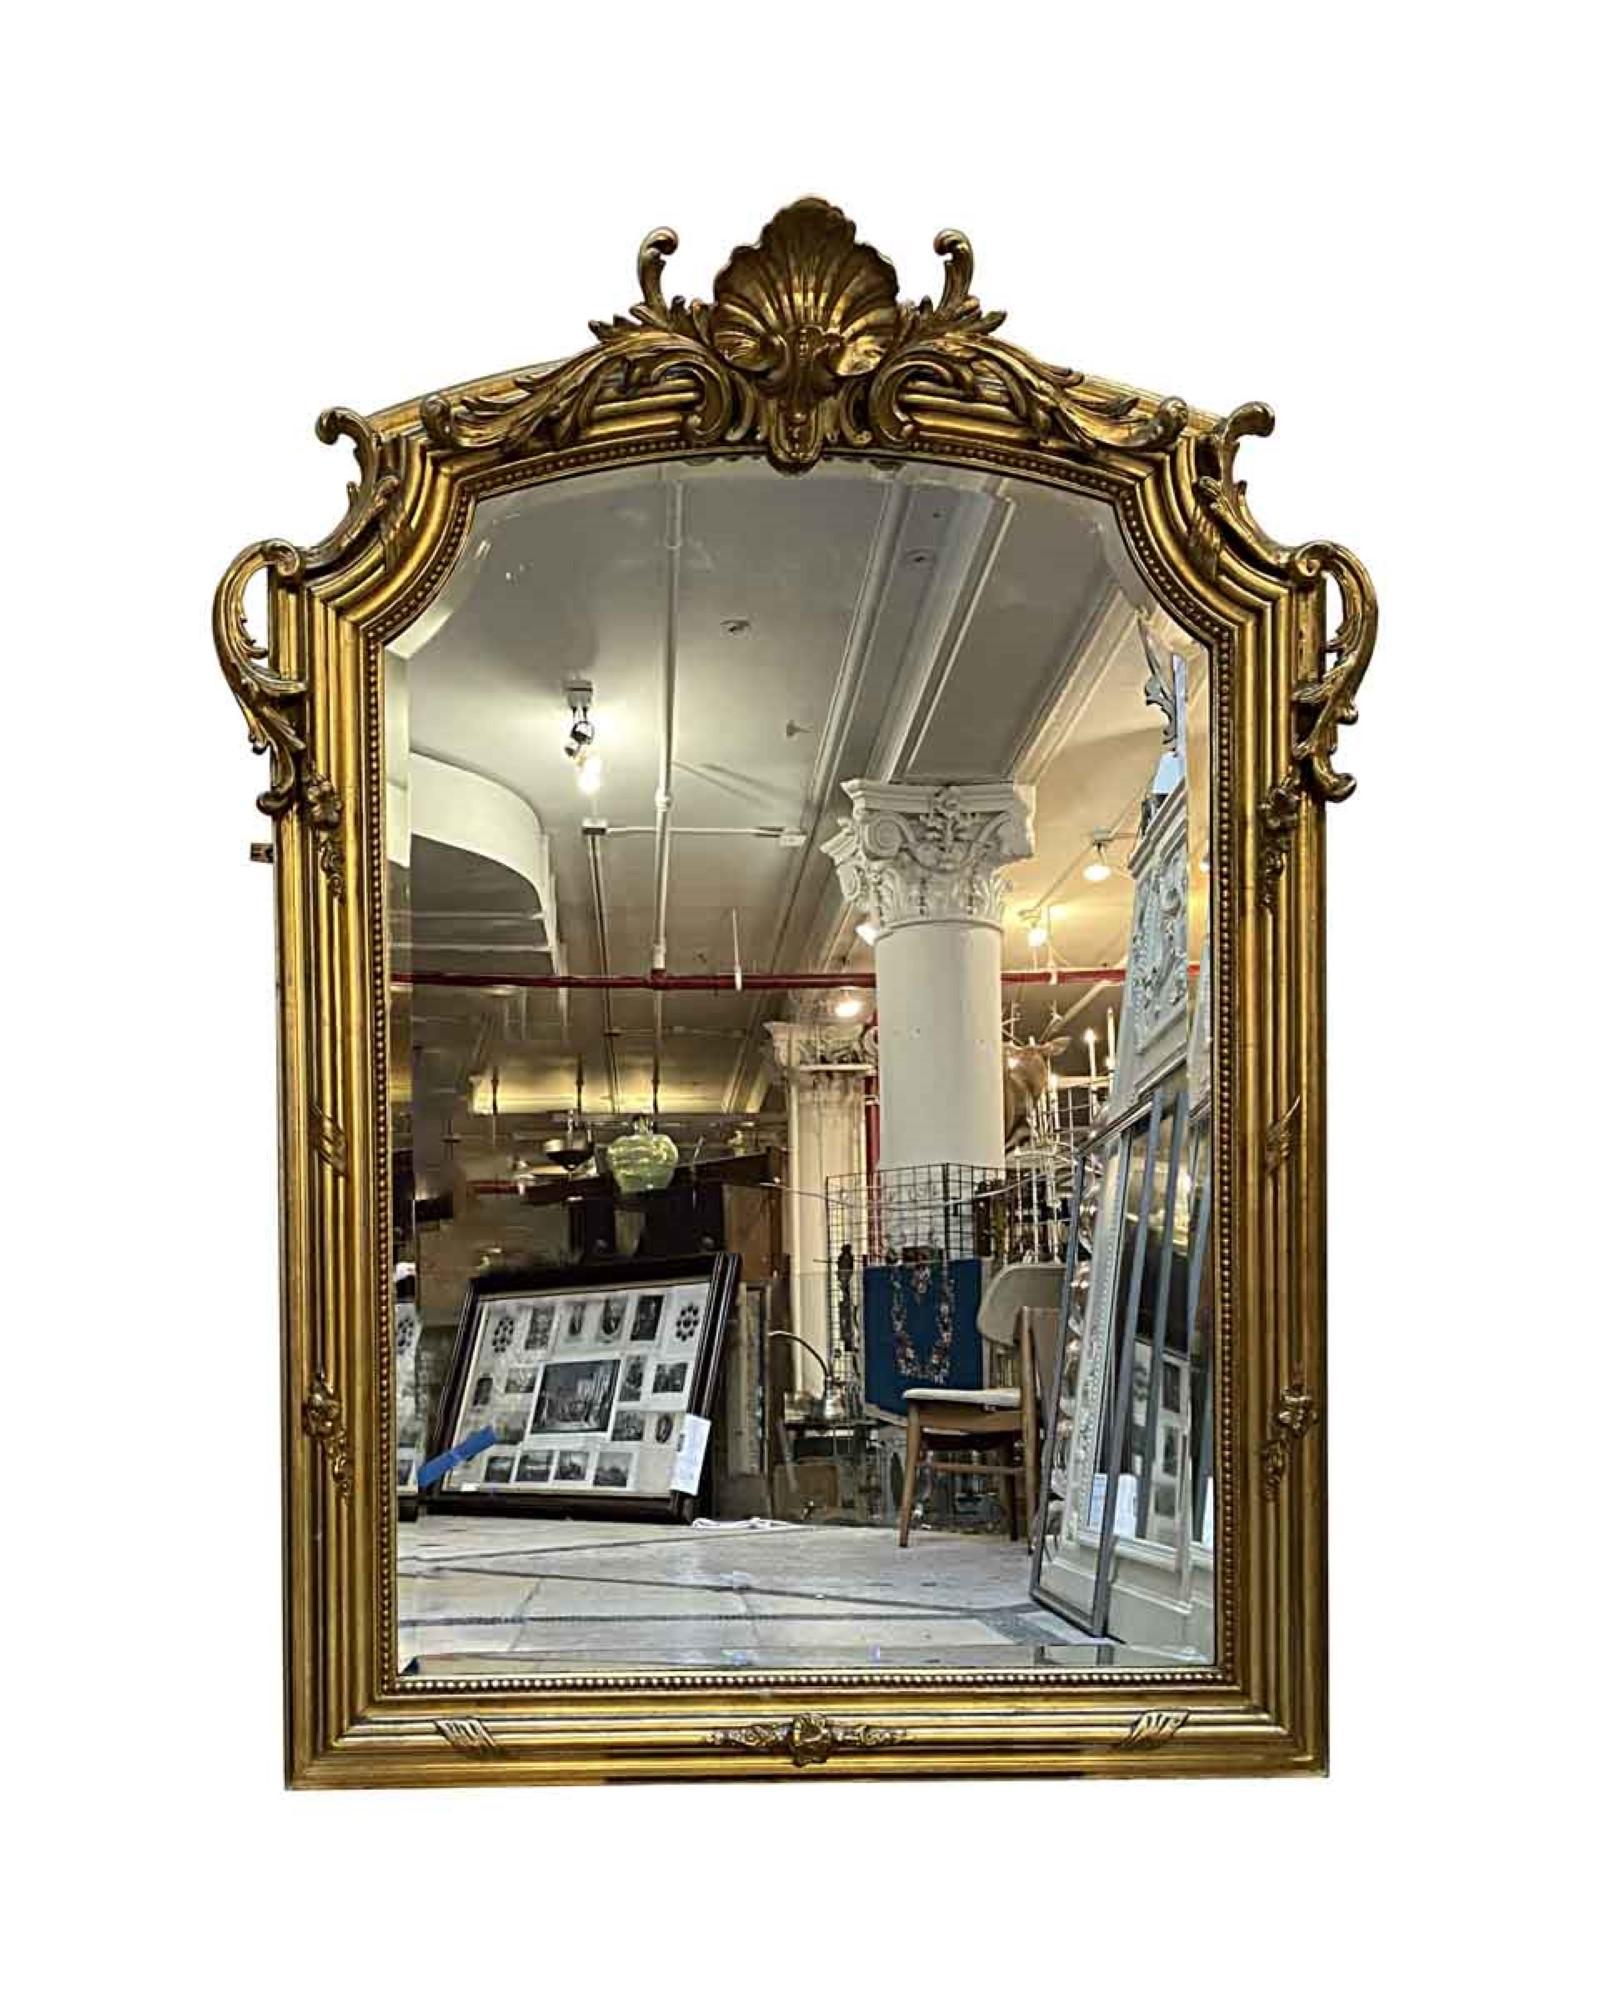 1930s antique French Rococo style hand carved wood beveled mirror with a gilded finish and ornate details. This can be seen at our 333 West 52nd St location in the Theater District West of Manhattan.